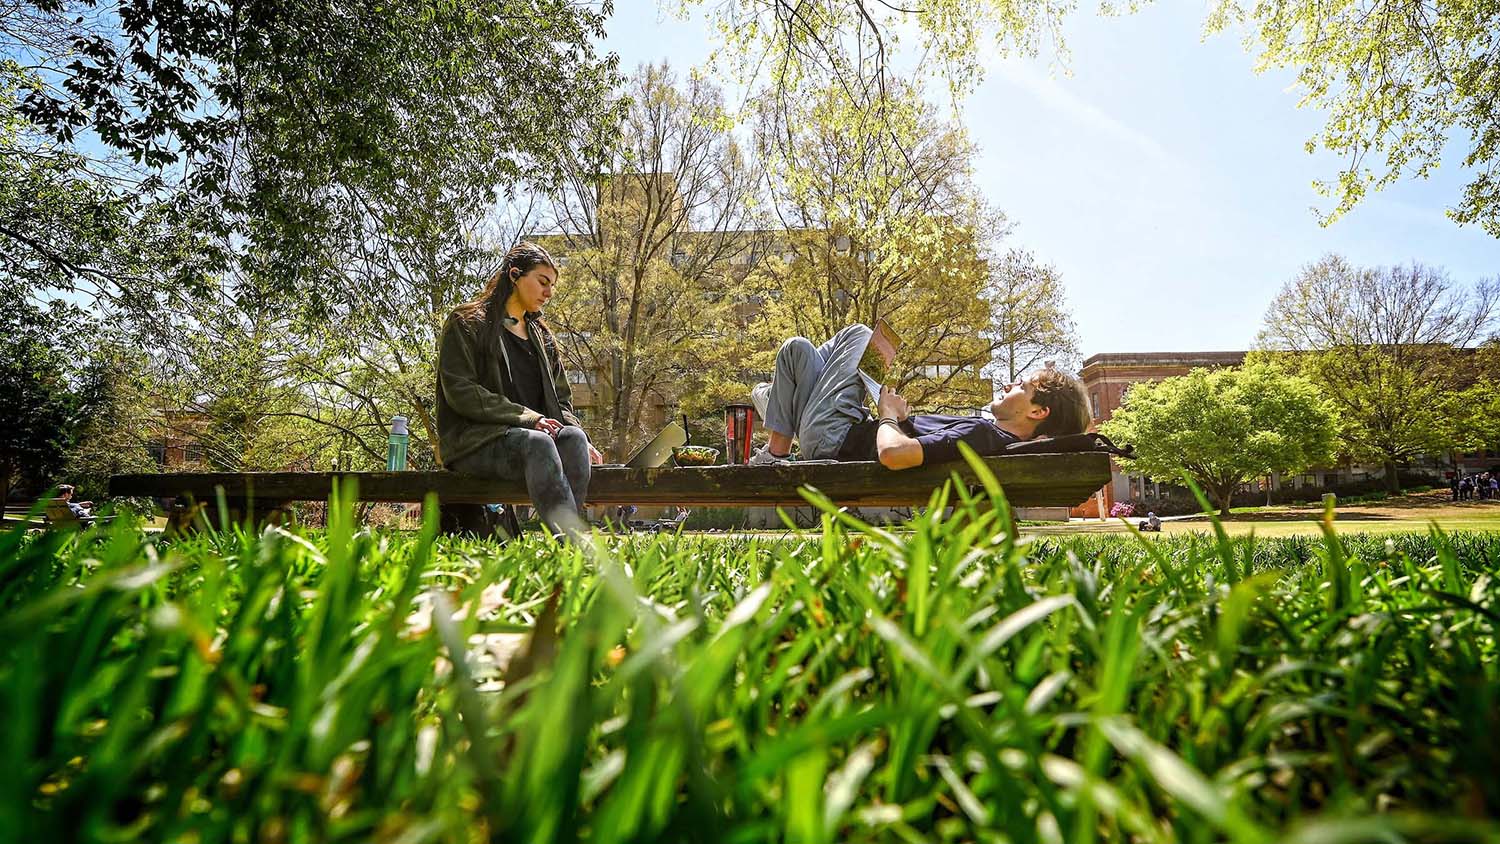 Students soak up the sun — and squeeze in some studying — in the Court of North Carolina.